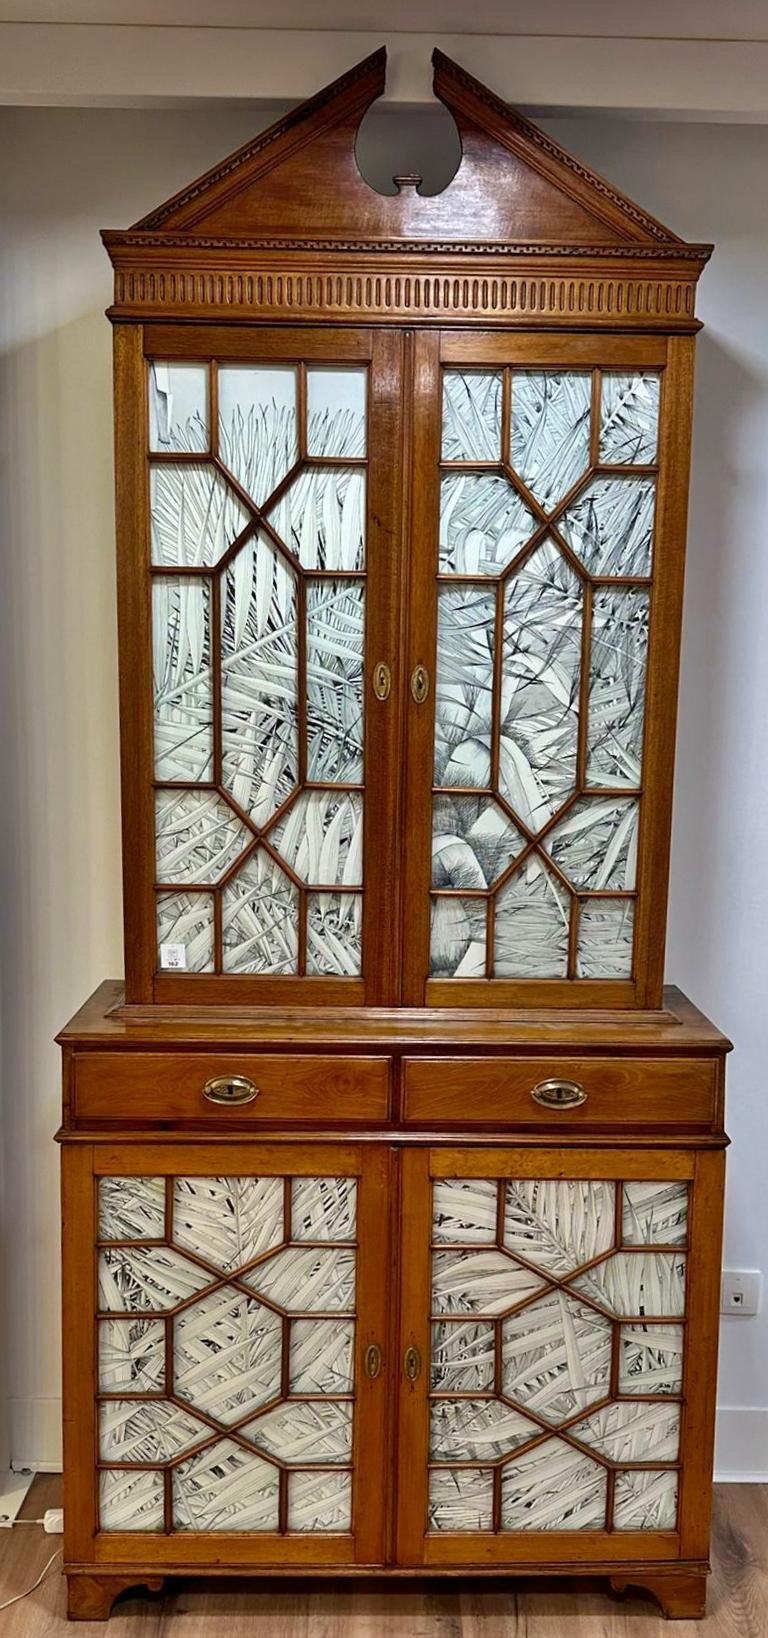 Portuguese cupboard

End 18th century (1777-1816)
Mahogany
Glass top and bottom doors
Portuguese
Dimensions: 248 x 108 x 43 cm
Very good condition.